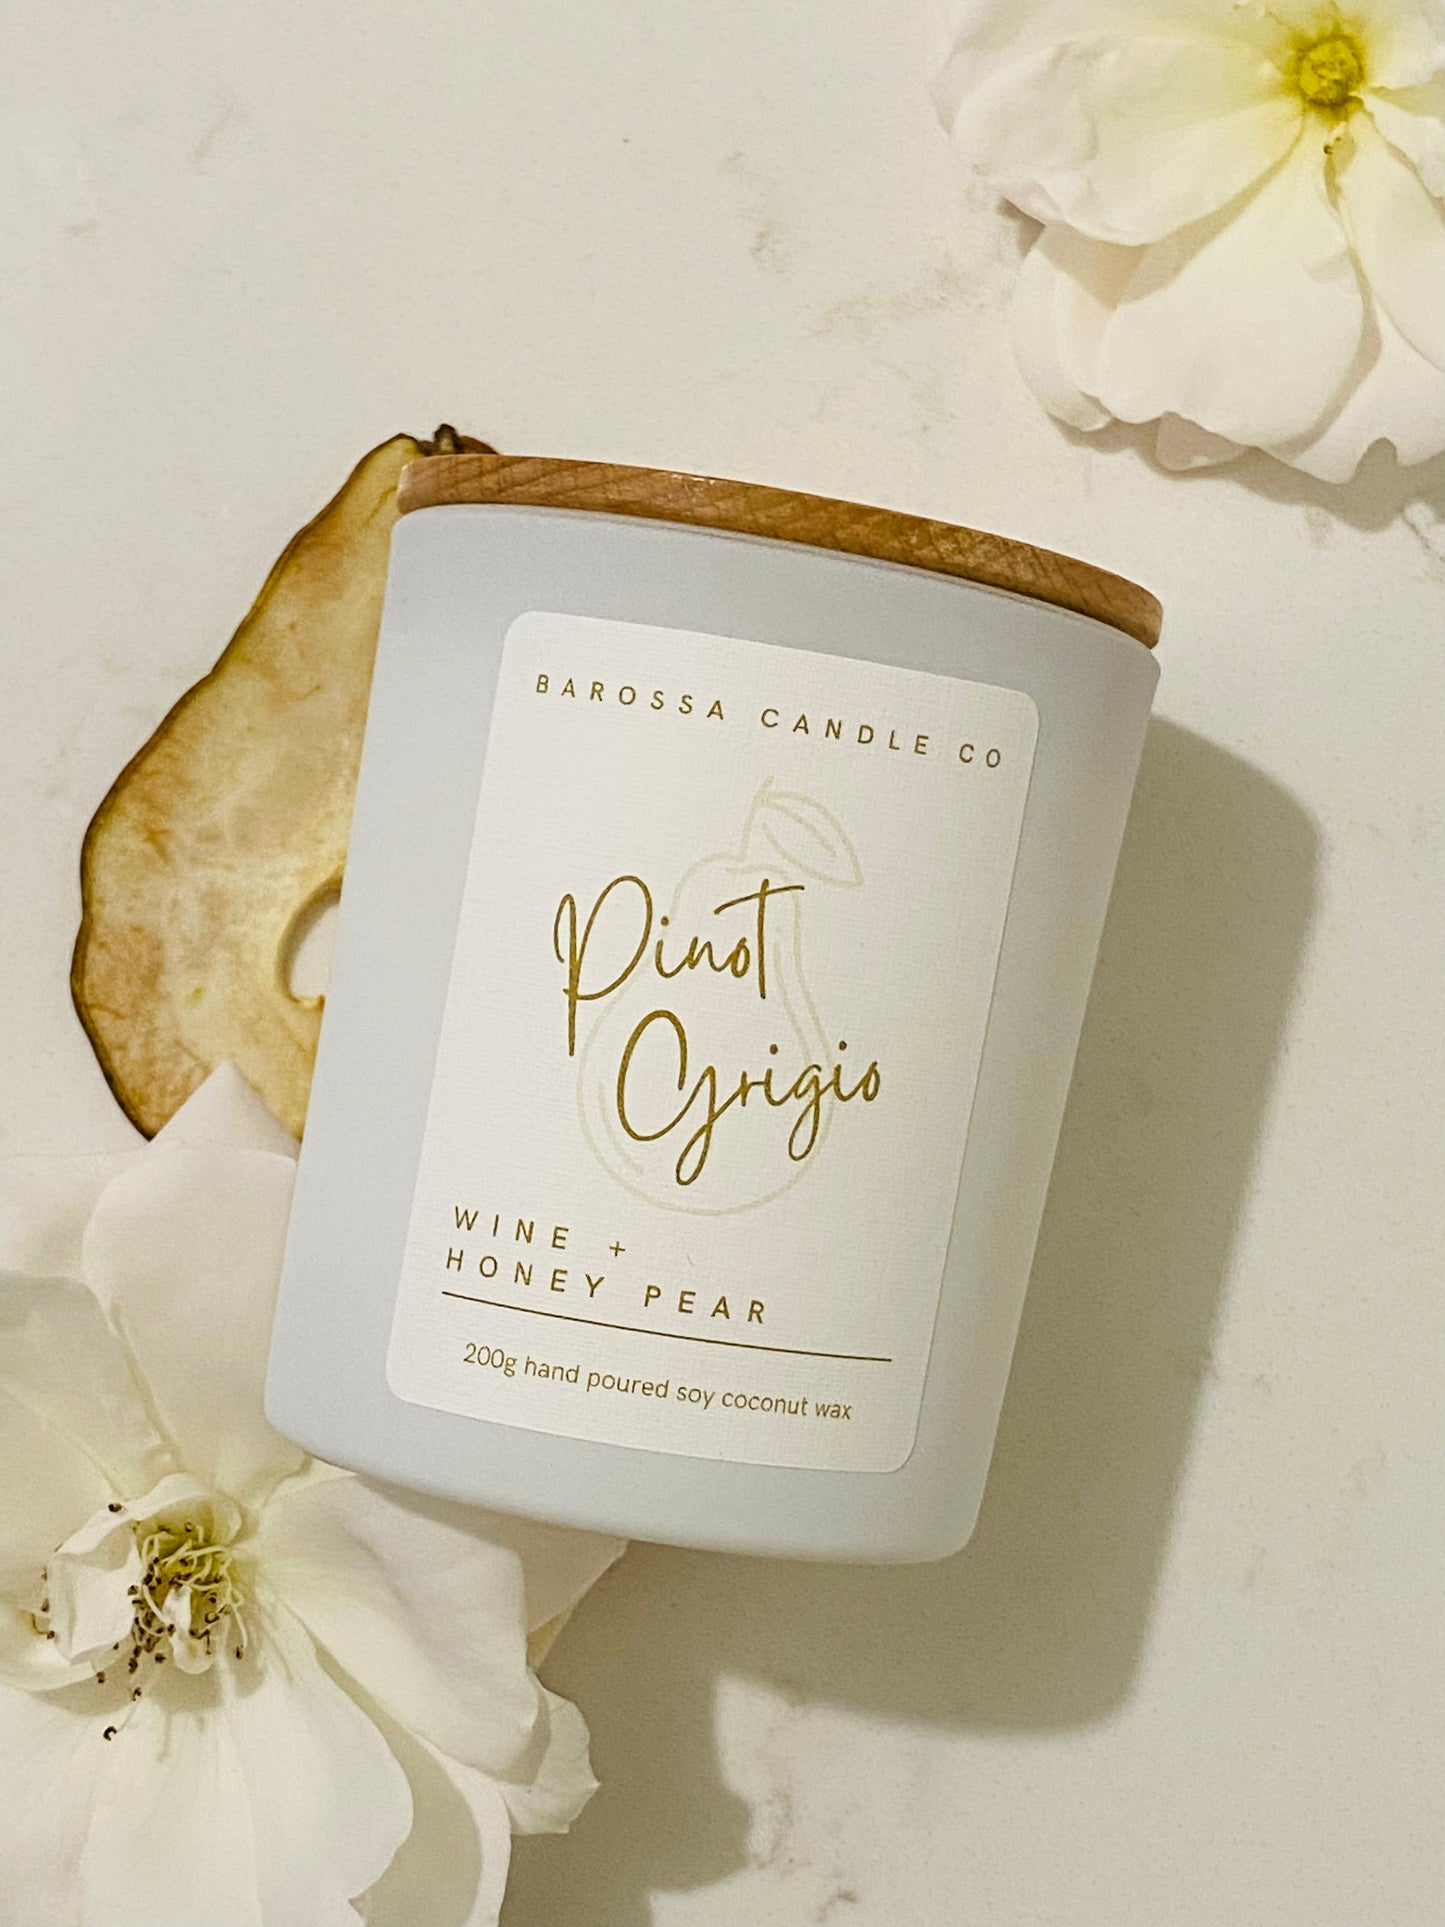 Pinot Grigio: Wine + Honey Pear Coconut Soy Candle